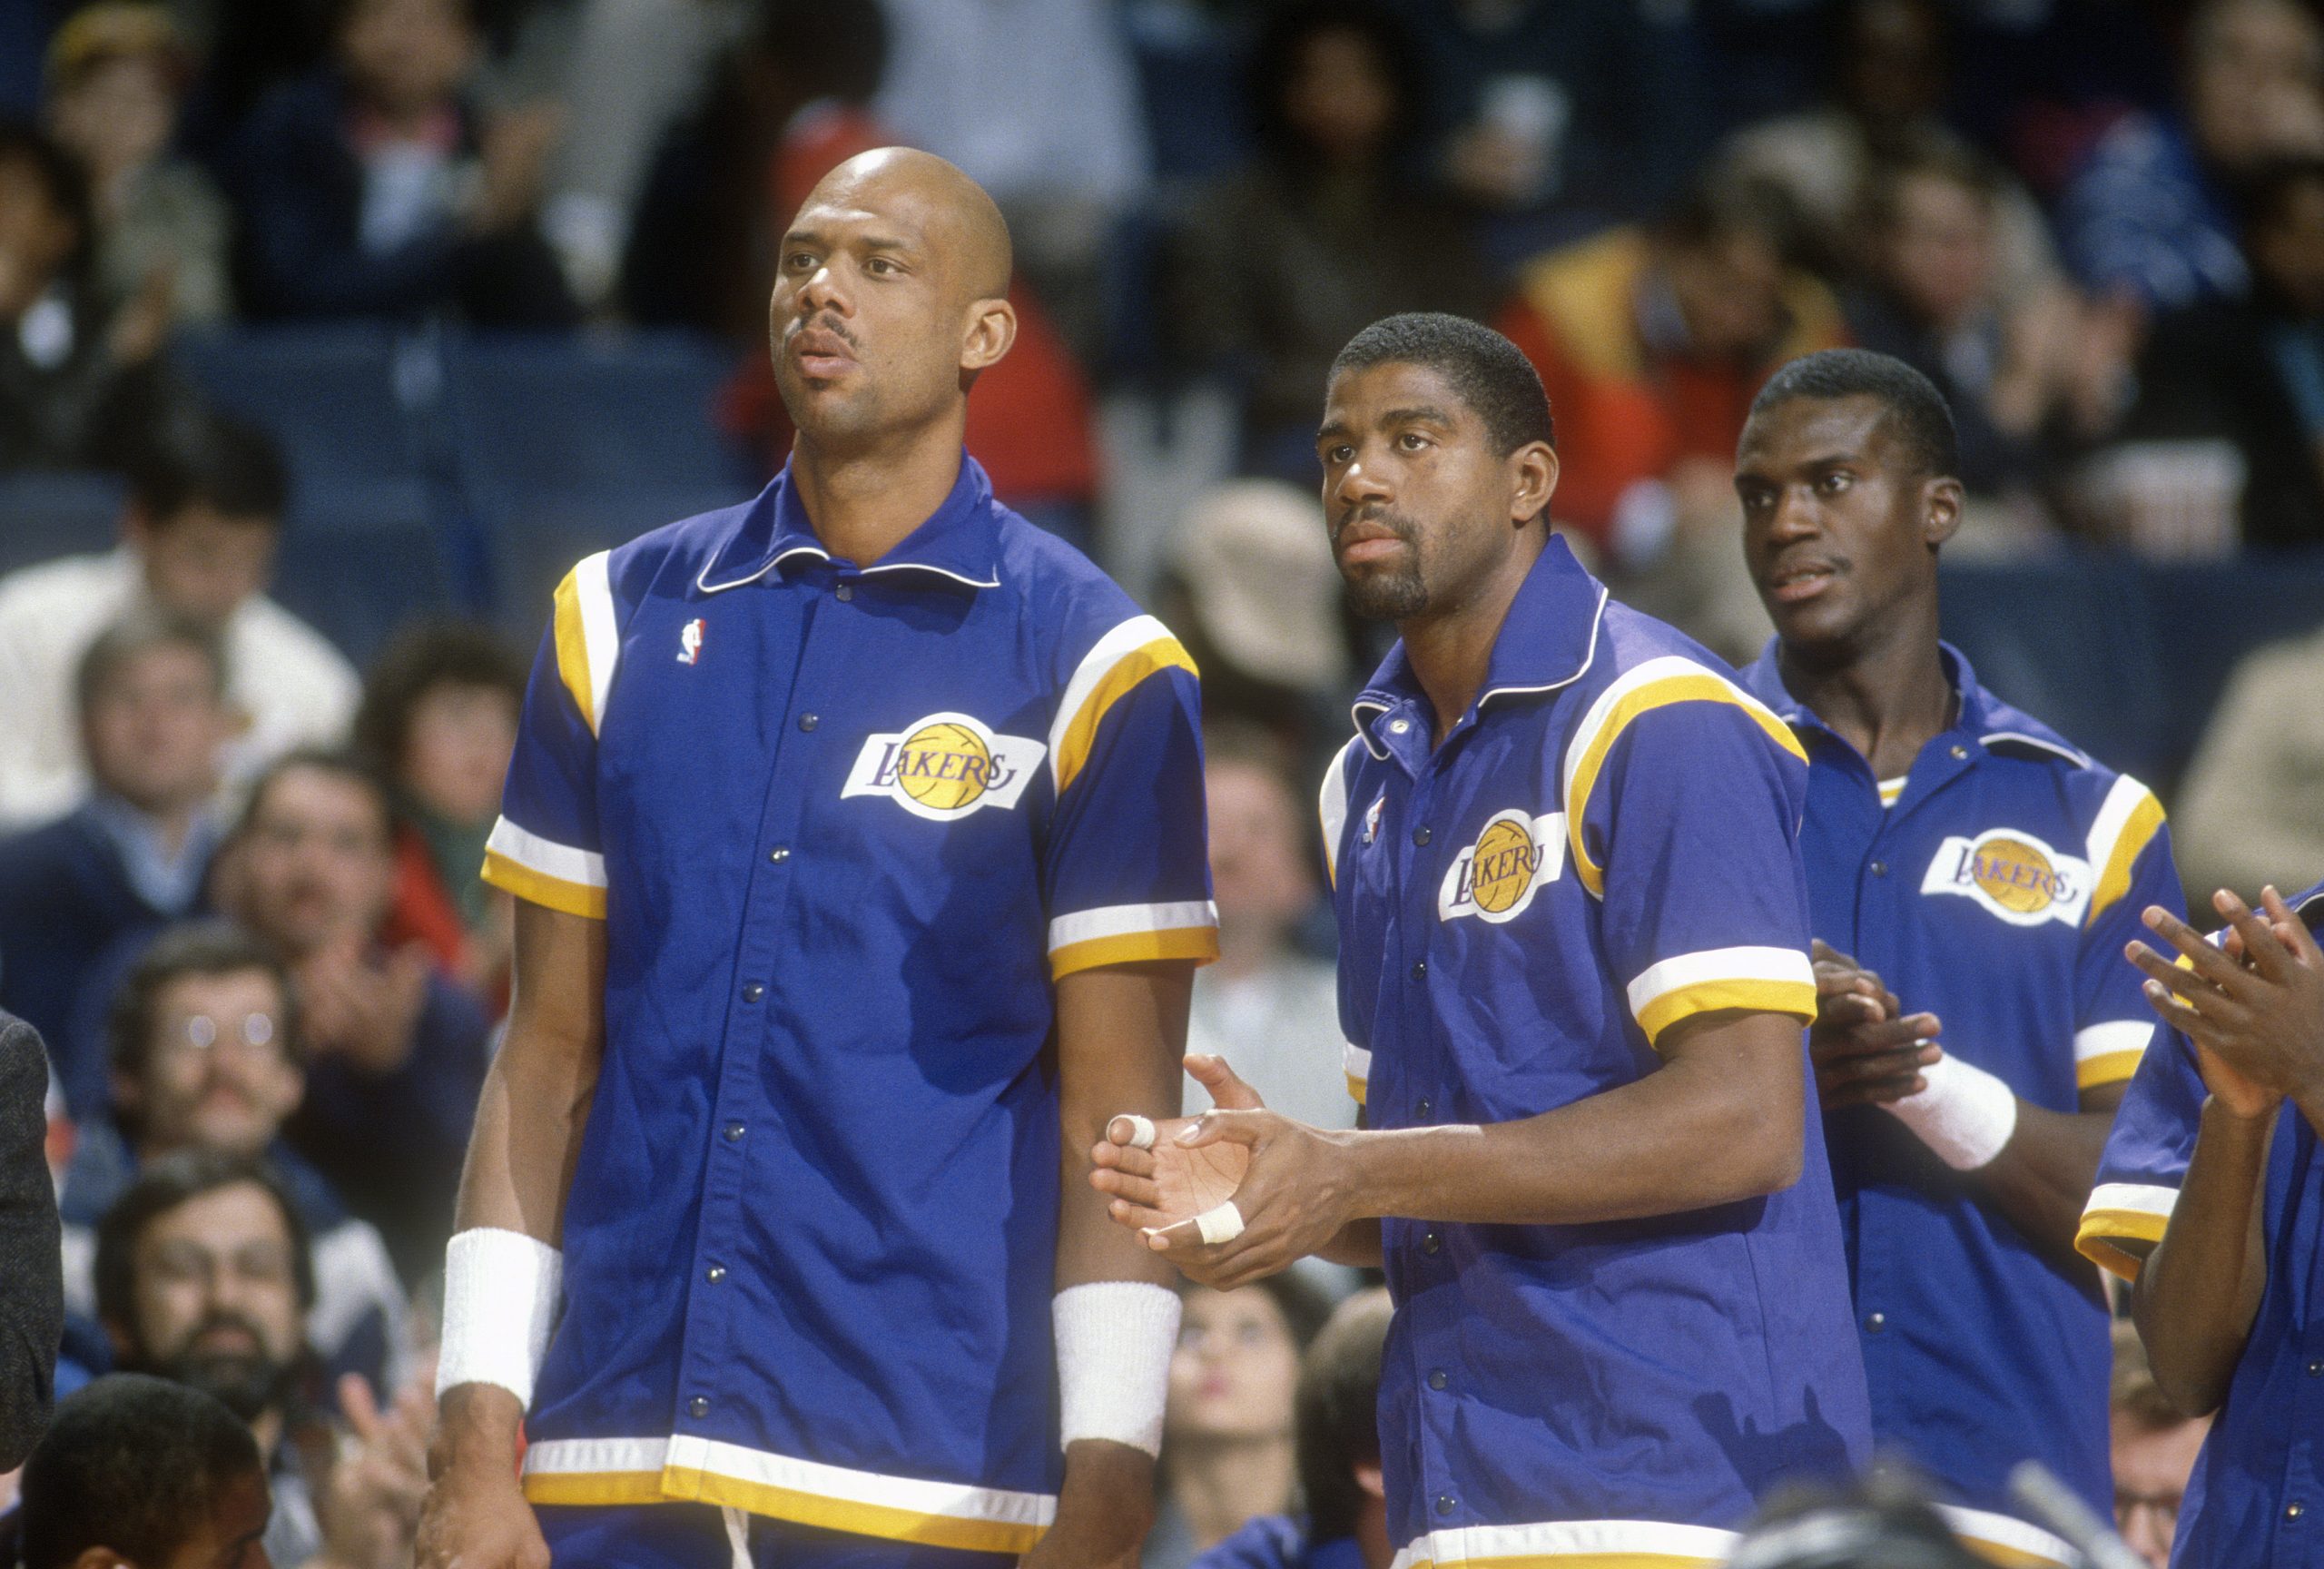 (L-R) Kareem Abdul-Jabbar, Magic Johnson, and Orlando Woolridge of the Los Angeles Lakers look on against the Indiana Pacers during an NBA basketball game circa 1988.